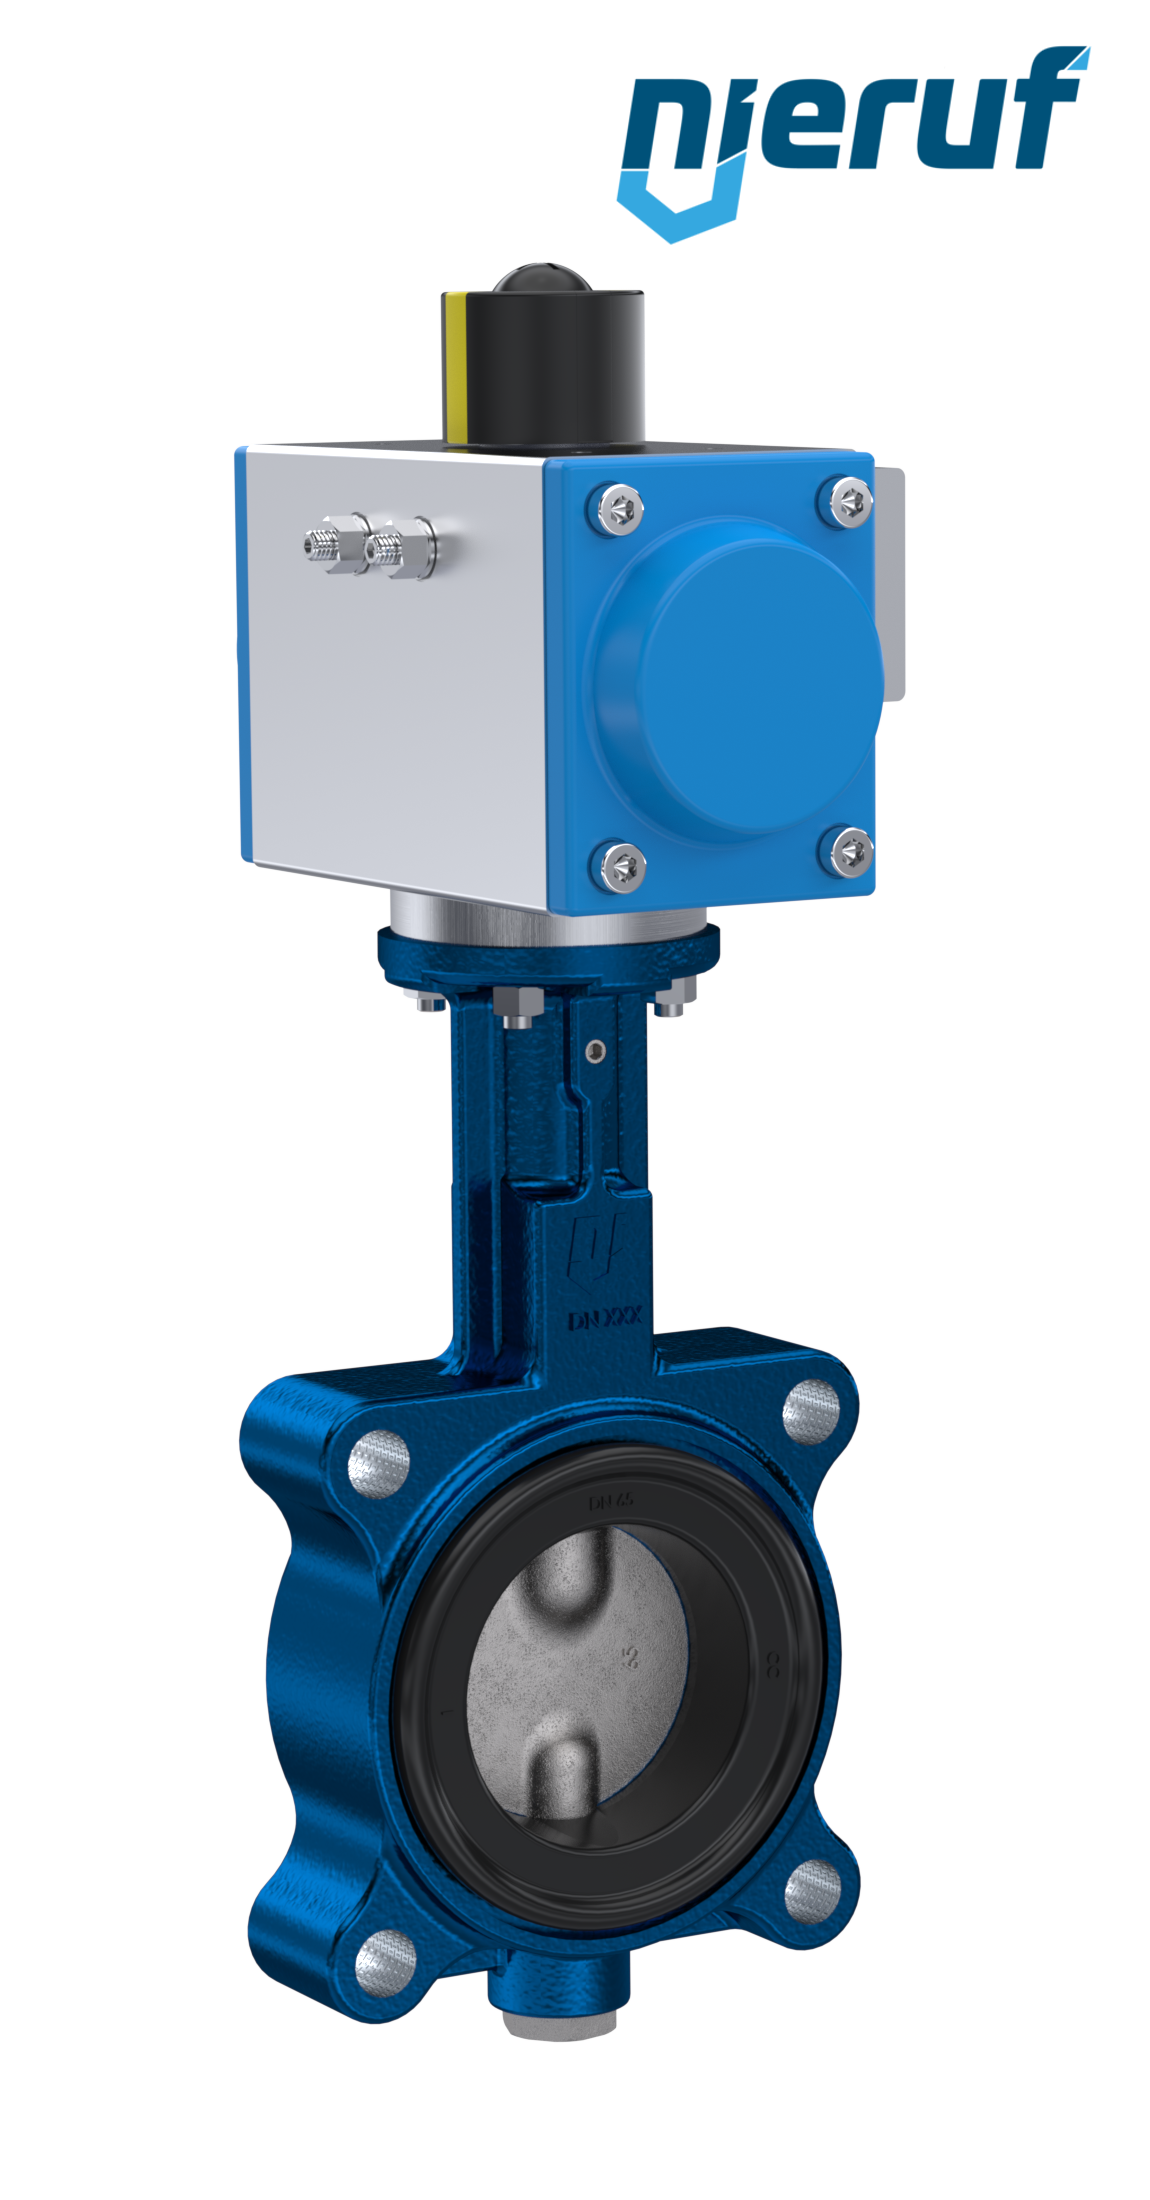 Butterfly valve DN 65 AK02 EPDM DVGW drinking water, WRAS, ACS, W270 pneumatic actuator double acting